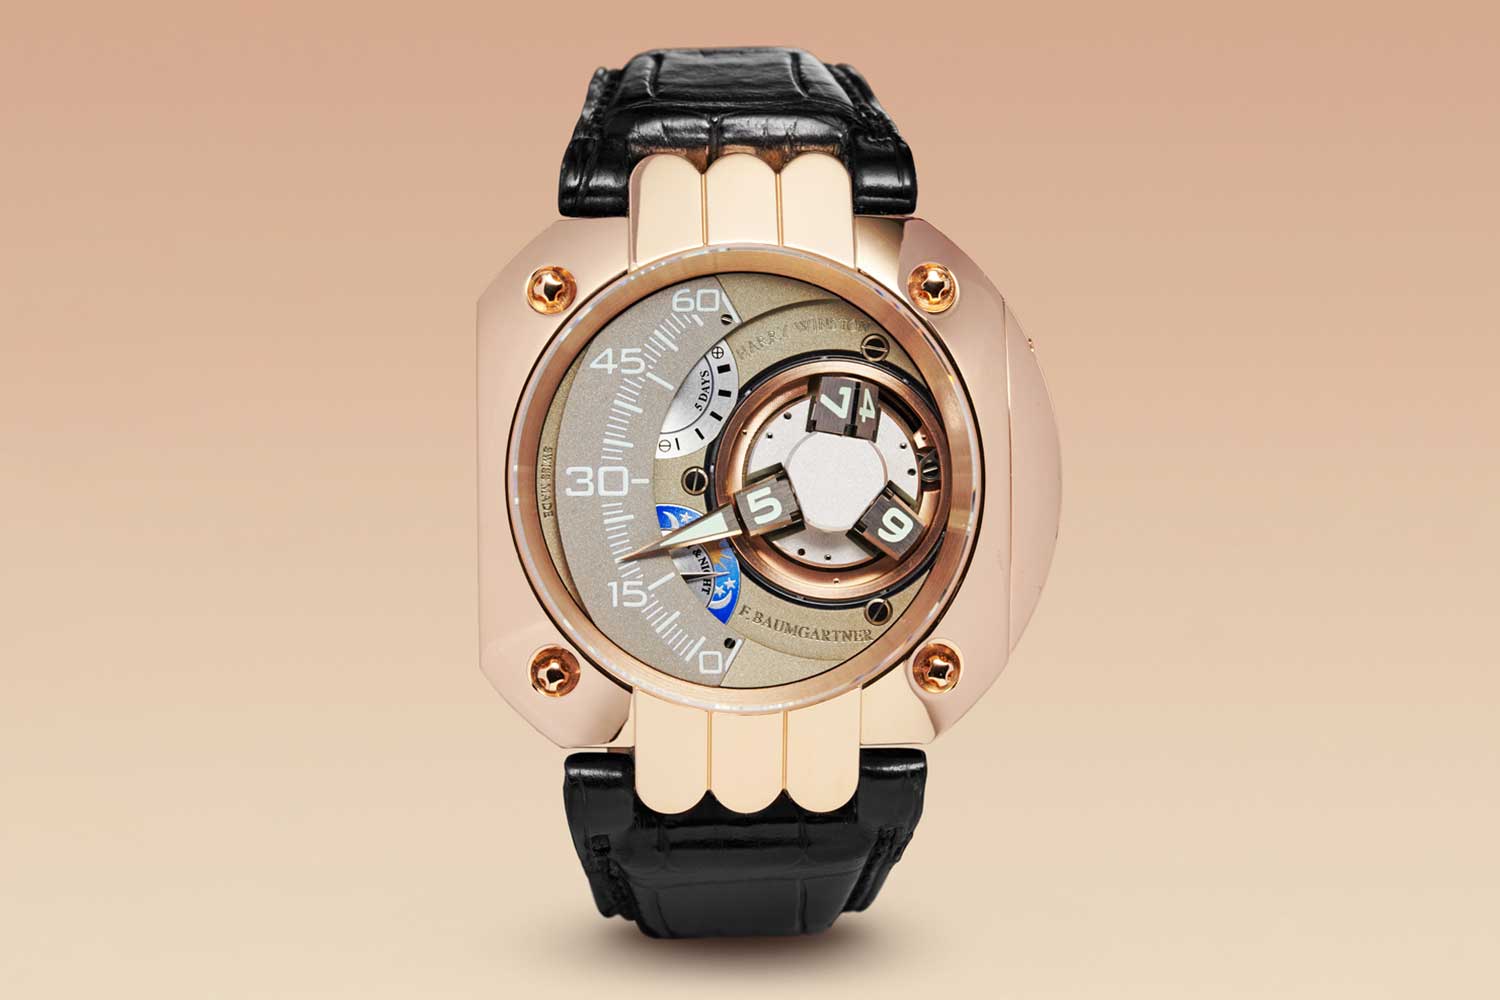 Lot 28: Harry Winston Opus V. Limited edition of 45 pieces in rose gold. (Image: Ineichen)